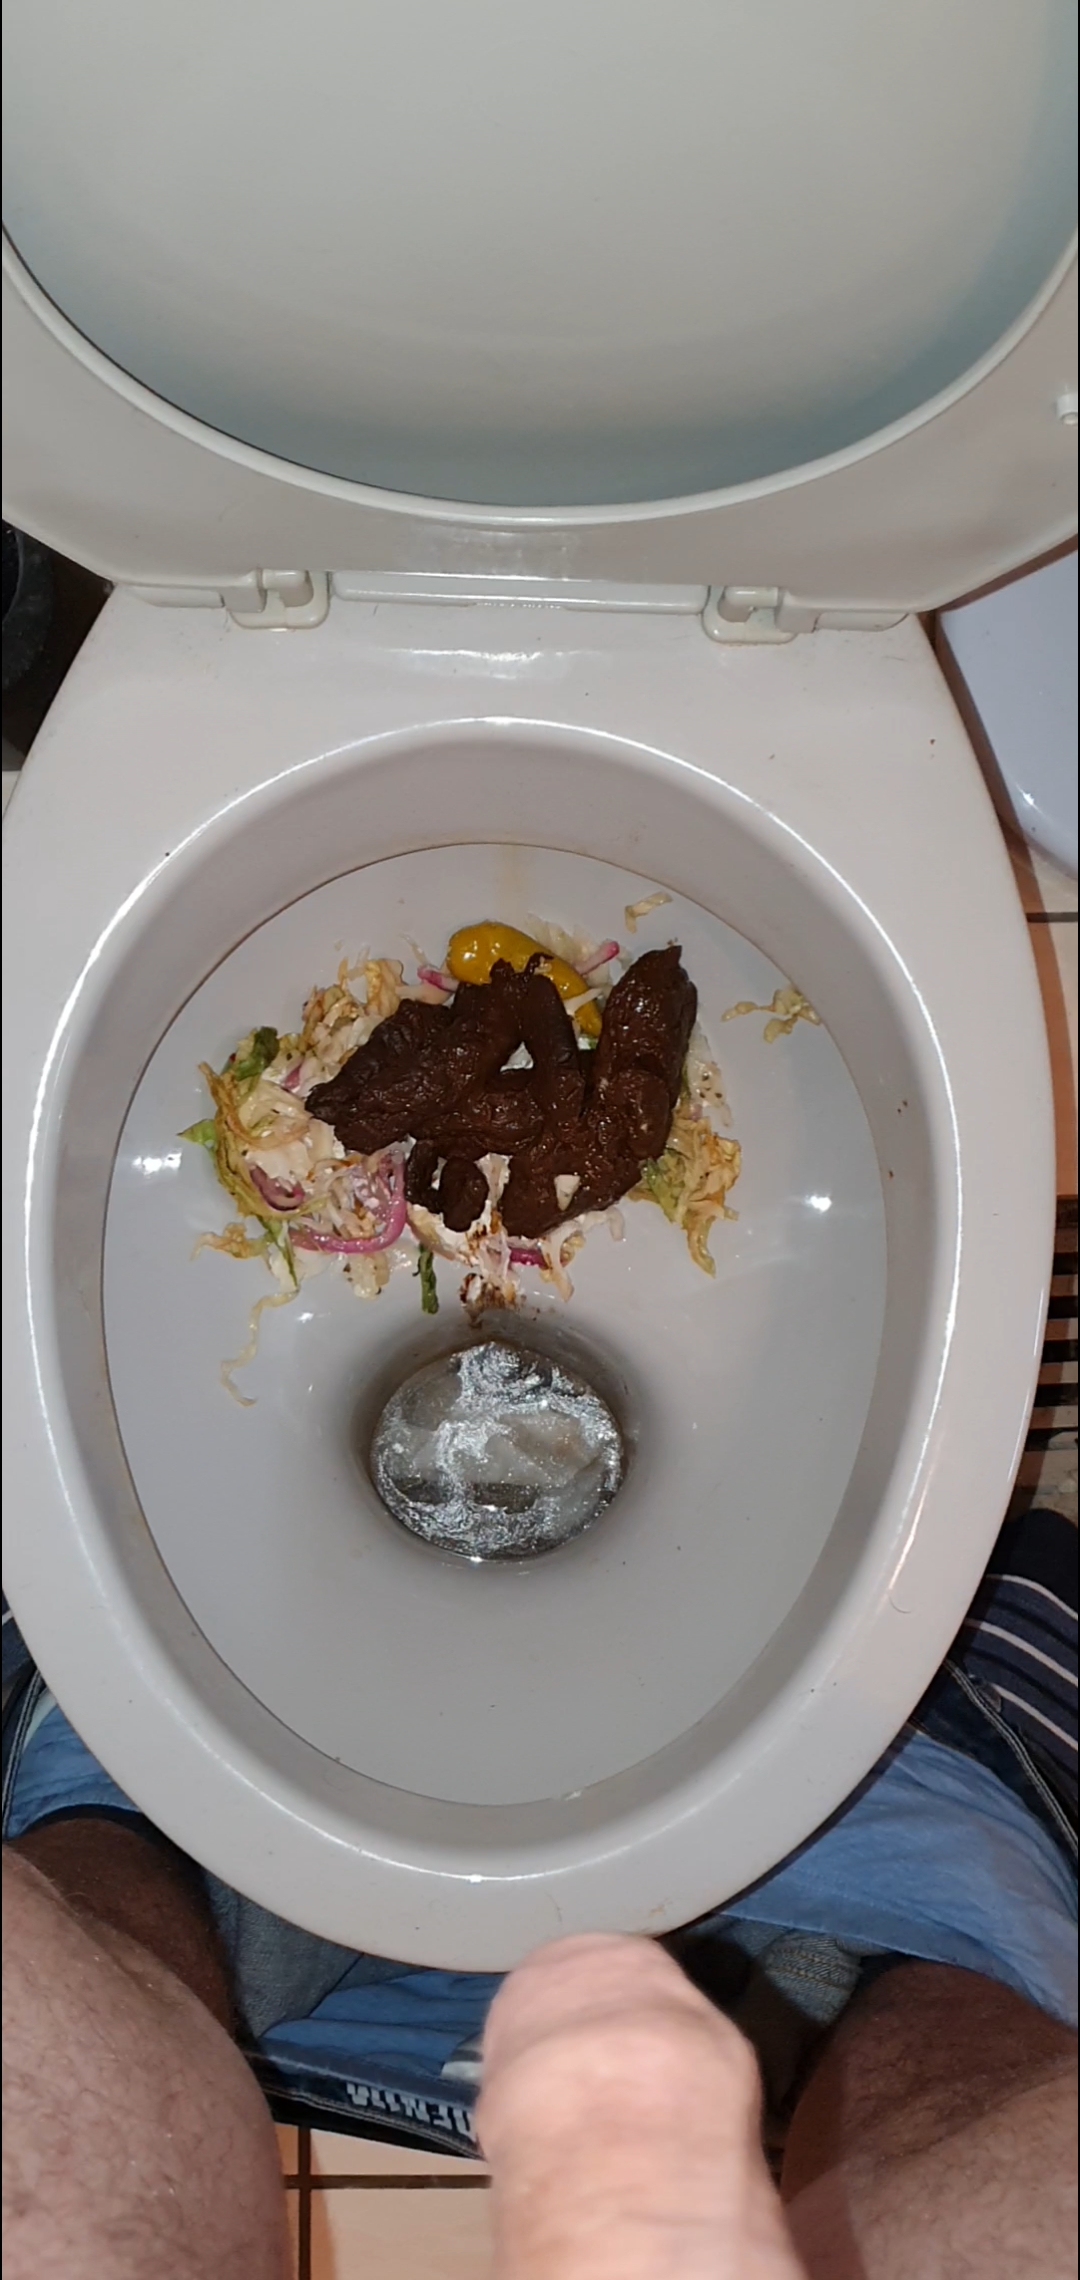 Shit and piss on an old Salat and flush it down the toilet